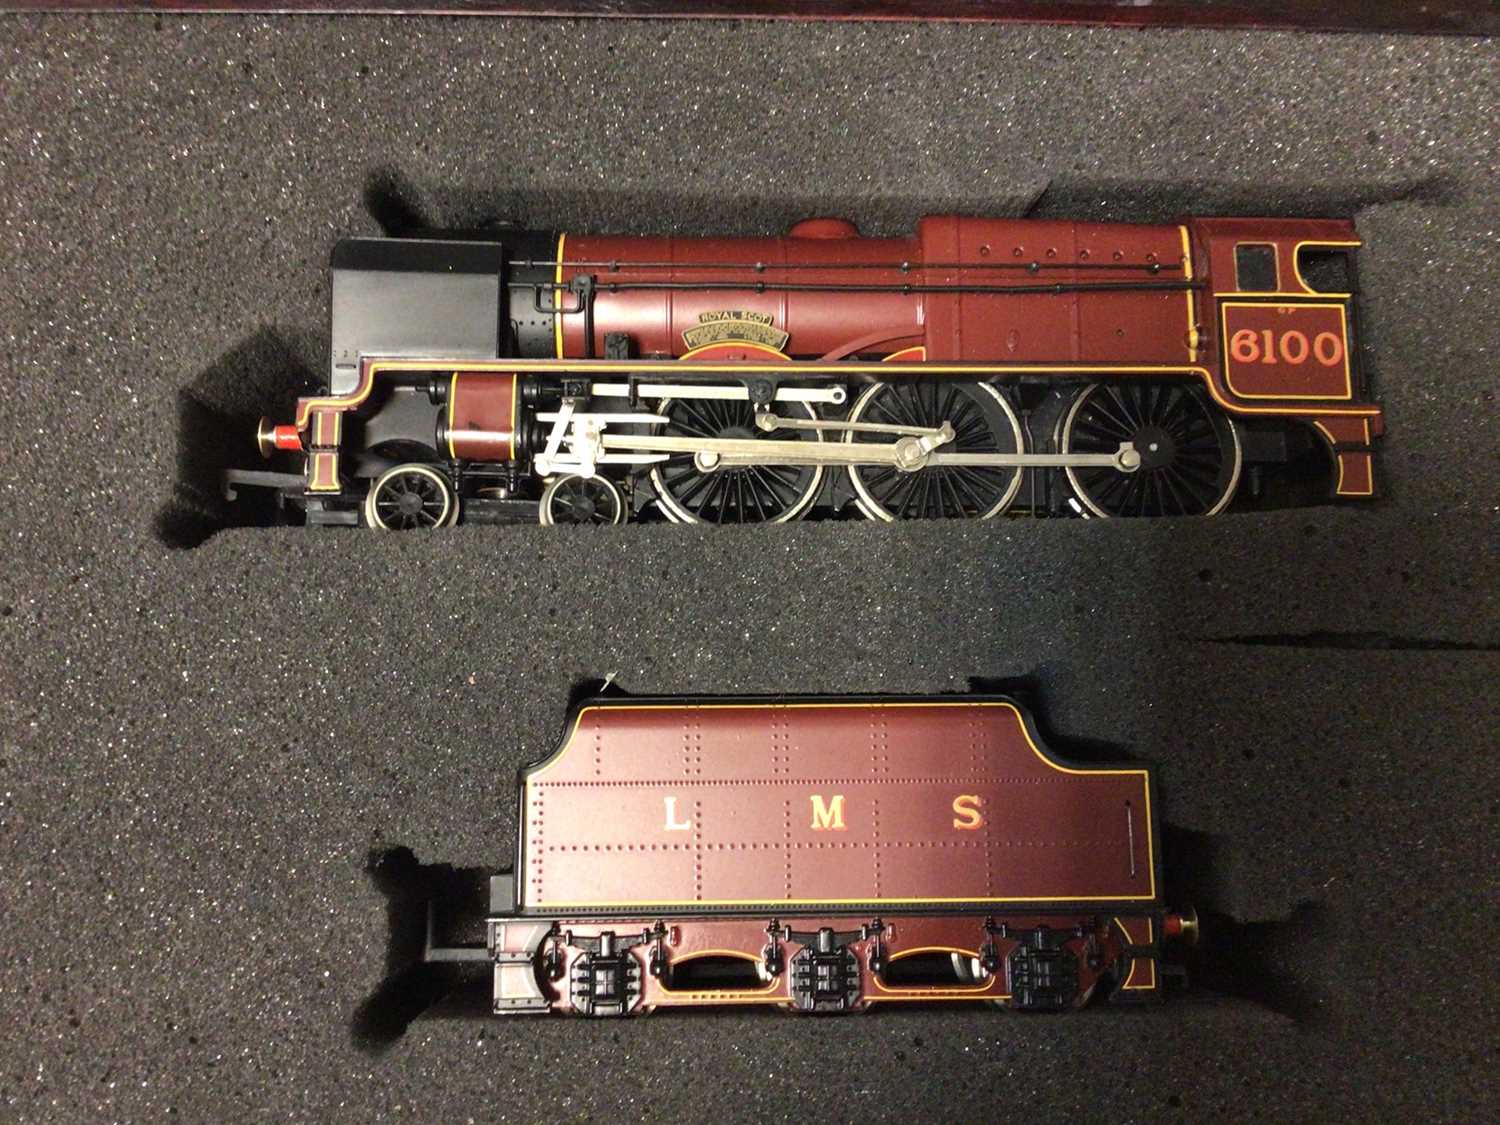 Bachmann Limited Edition 3649/4000 OO gauage LMS red "Royal Scot" 6100 locomotive and tender, in pre - Image 2 of 3